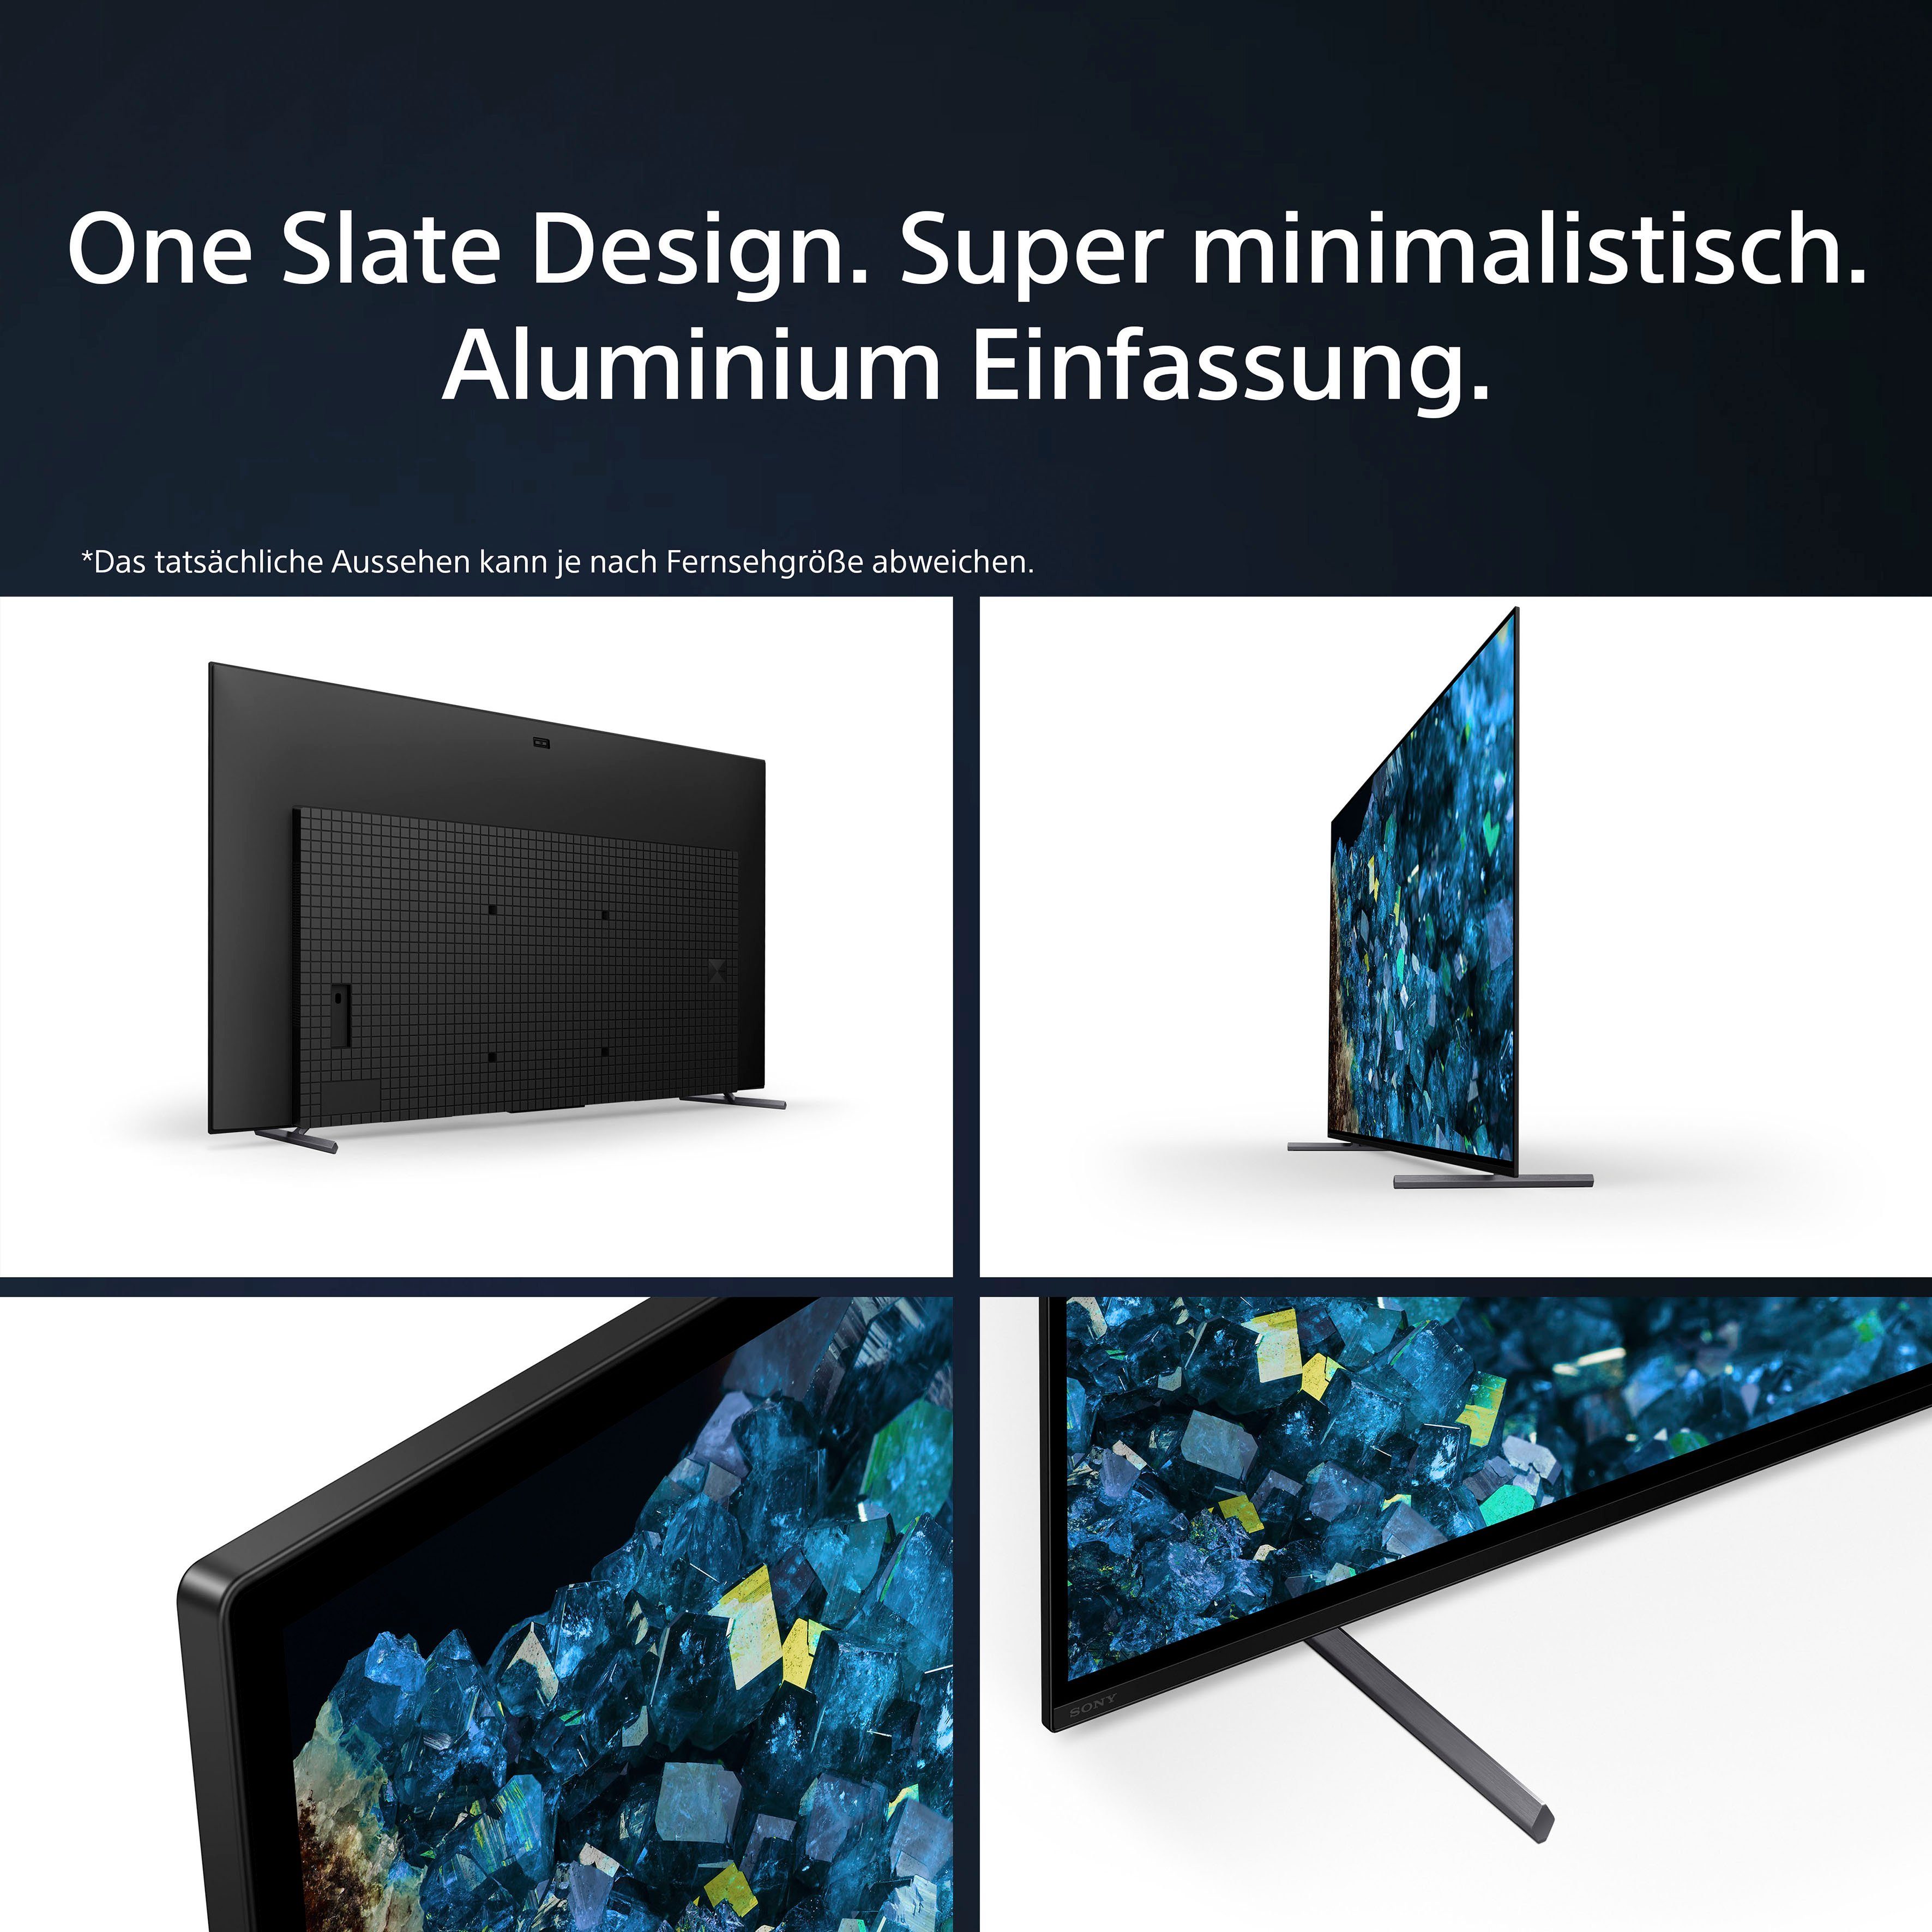 4K TRILUMINOS CORE, TV, Google XR-65A80L Ultra exklusiven Android Smart-TV, BRAVIA mit PS5-Features) cm/65 (164 Smart-TV, OLED-Fernseher Zoll, PRO, TV, HD, Sony